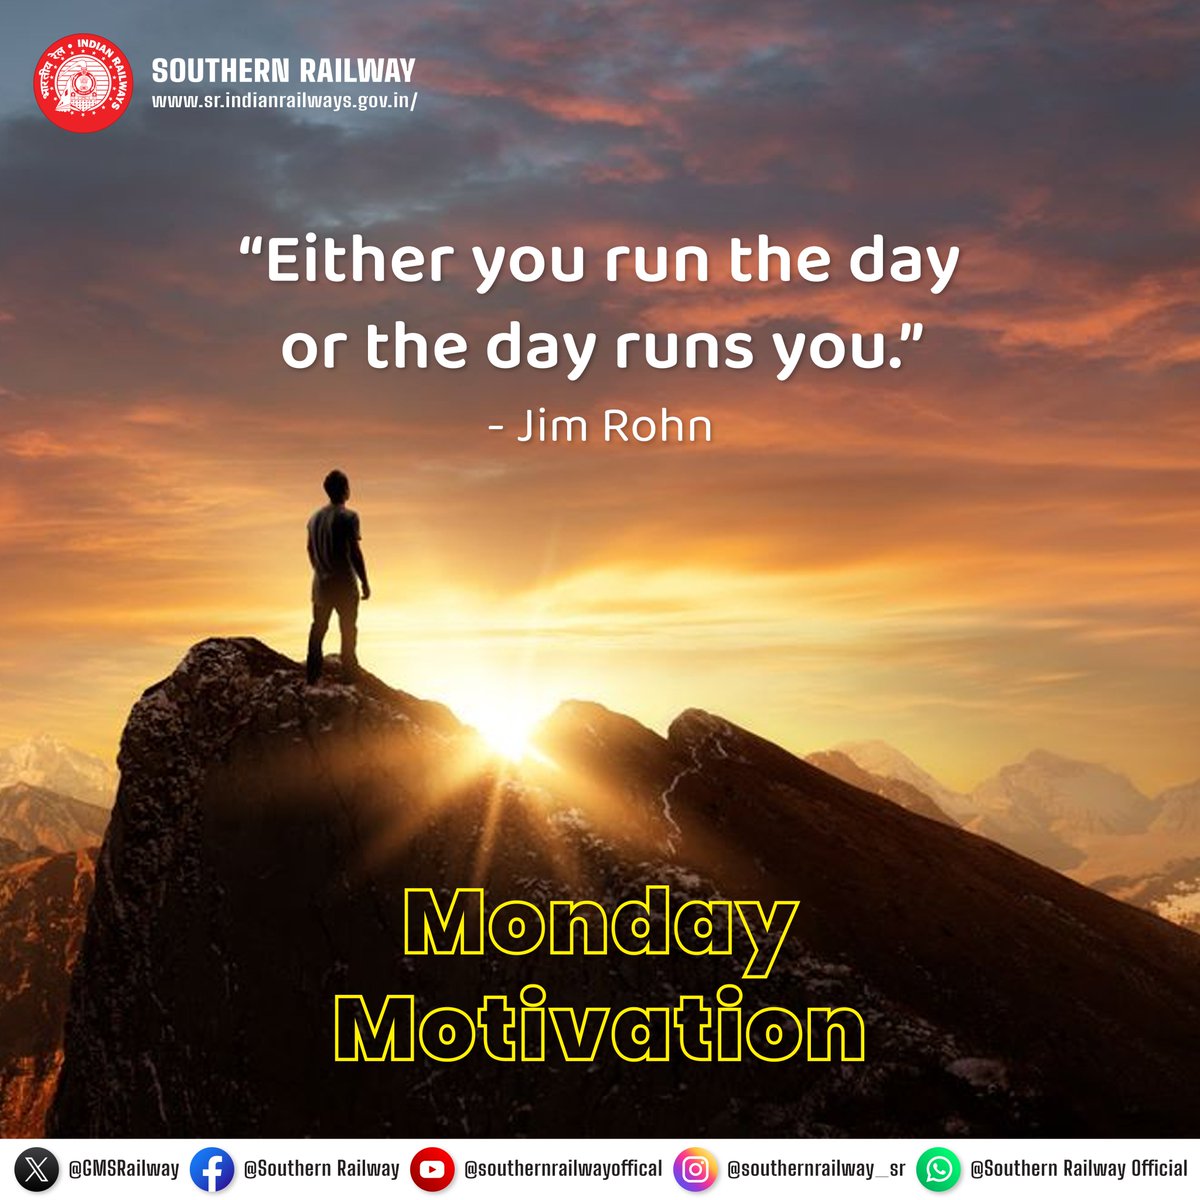 Empower Yourself this Monday! 💪 Take charge of your week with determination and positivity. #MondayMotivation #SouthernRailway